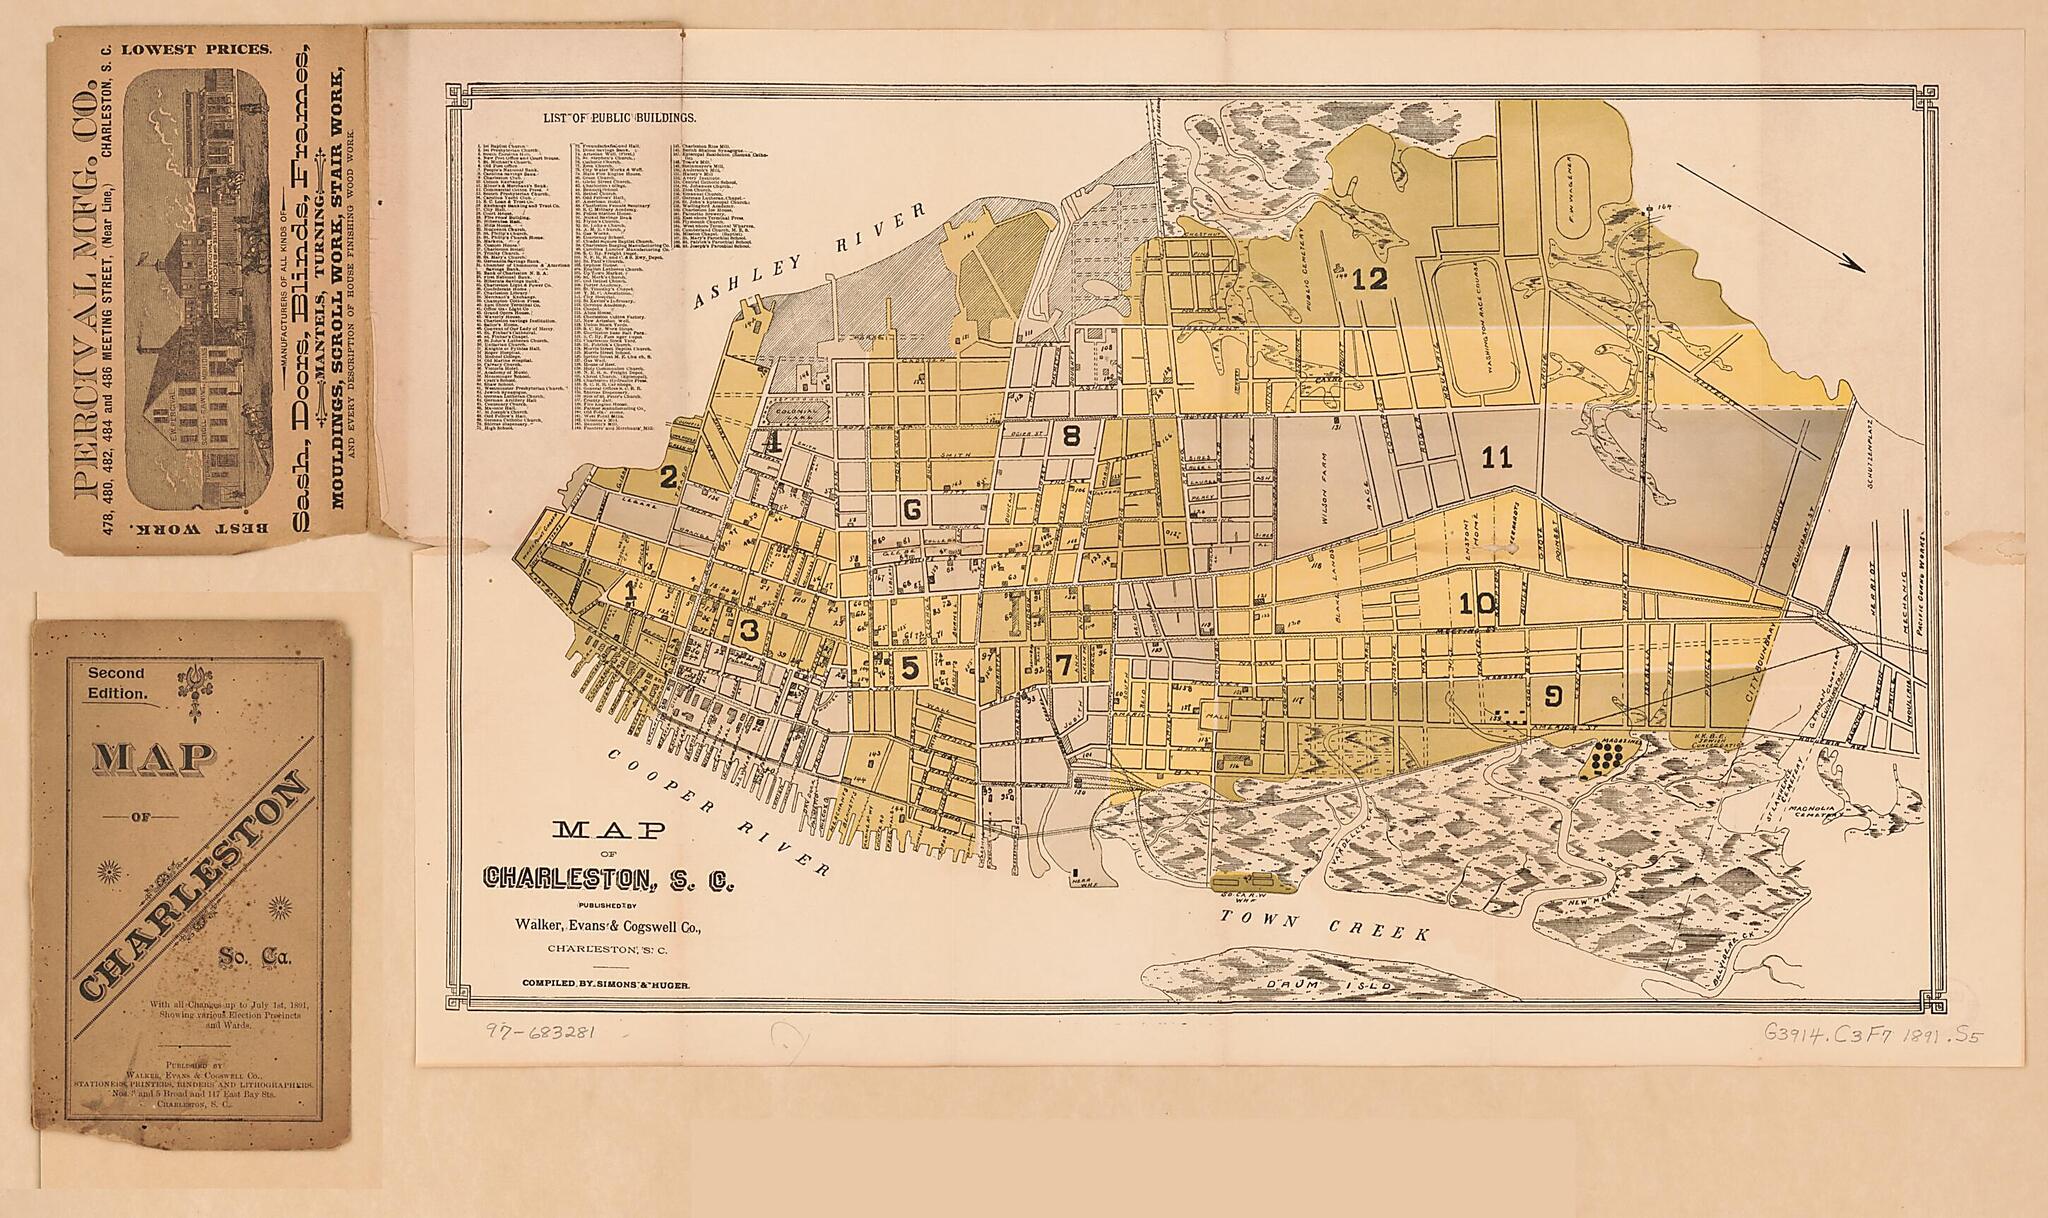 This old map of Map of Charleston, So. Ca. : With All Changes Up to July 1st, from 1891, Showing Various Election Precincts and Wards (Map of Charleston, S.C.) was created by  Simons &amp; Huger in 1891